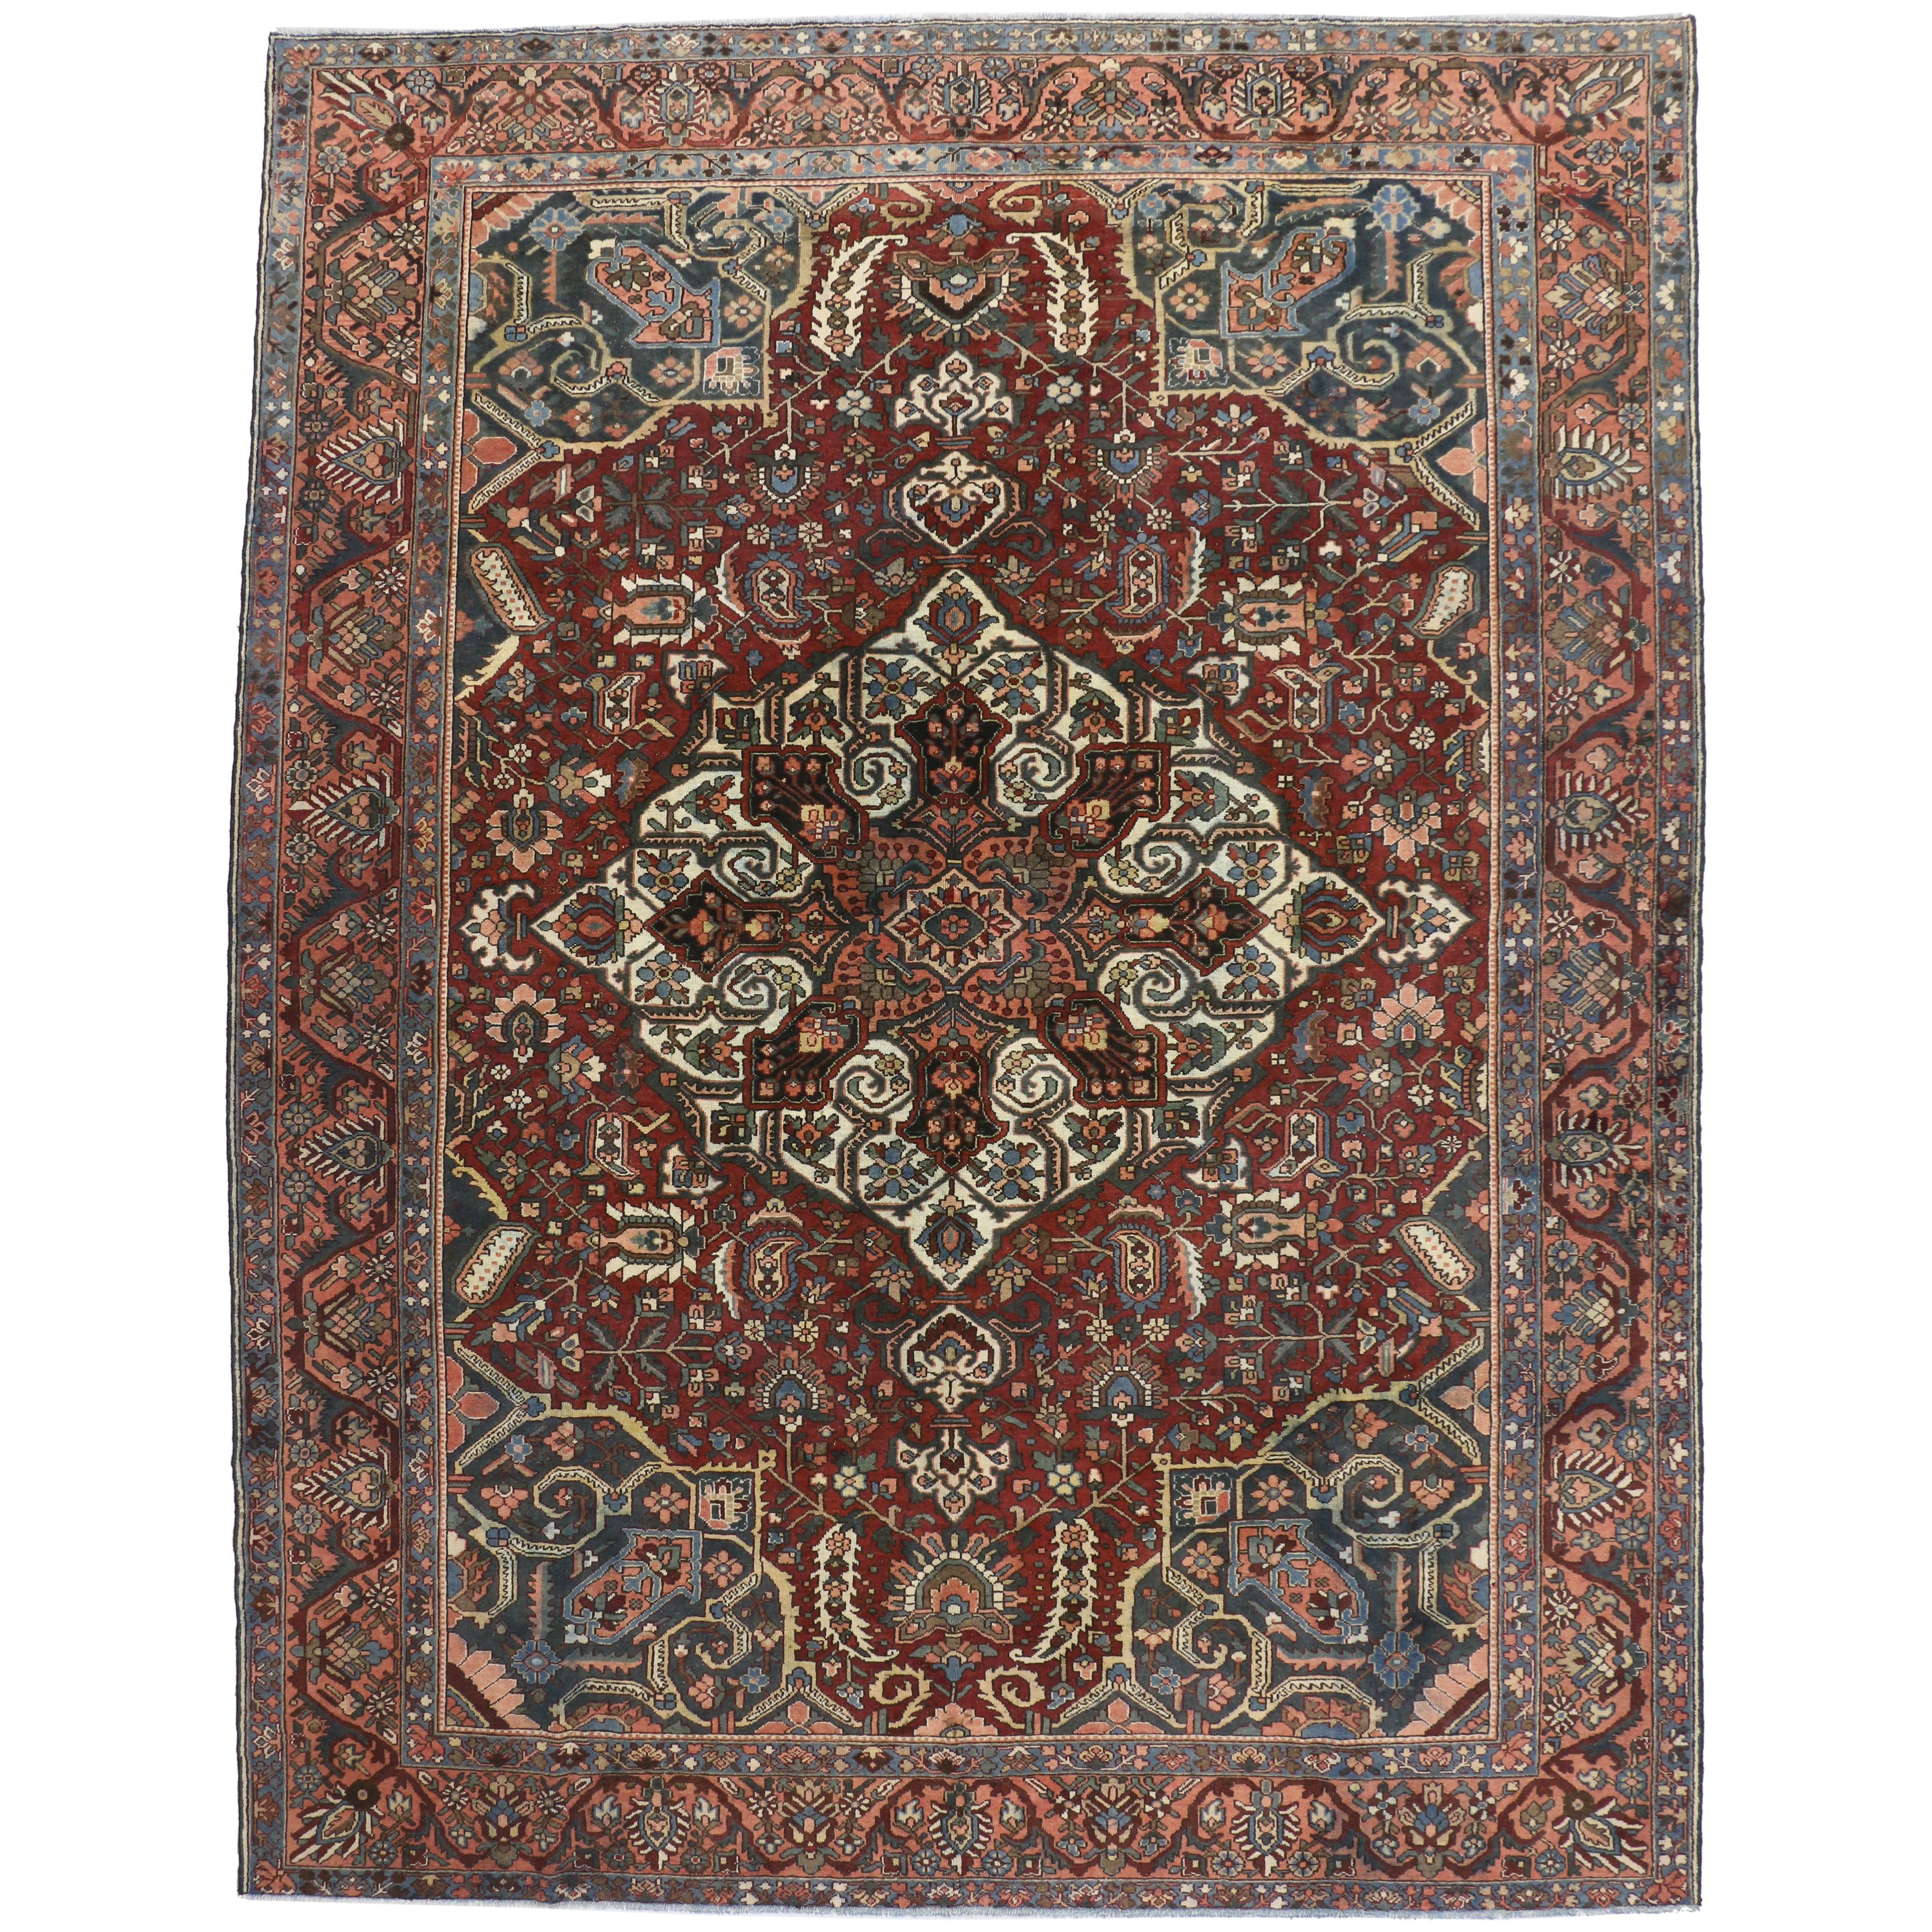 Antique Persian Bakhtiari Rug with Modern Traditional Style